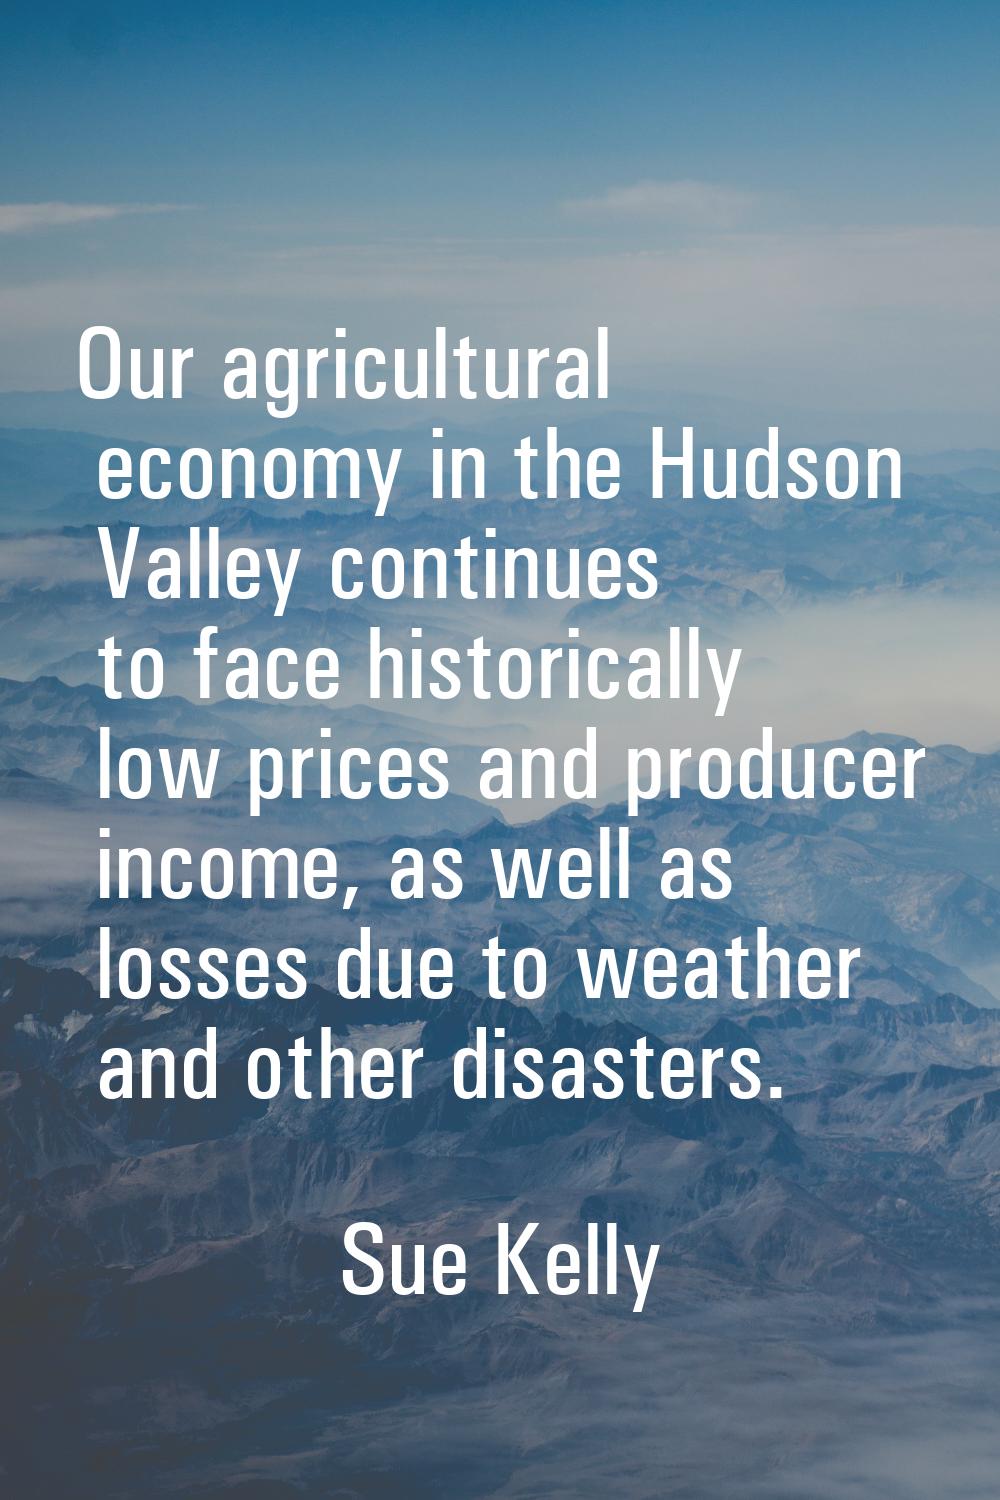 Our agricultural economy in the Hudson Valley continues to face historically low prices and produce